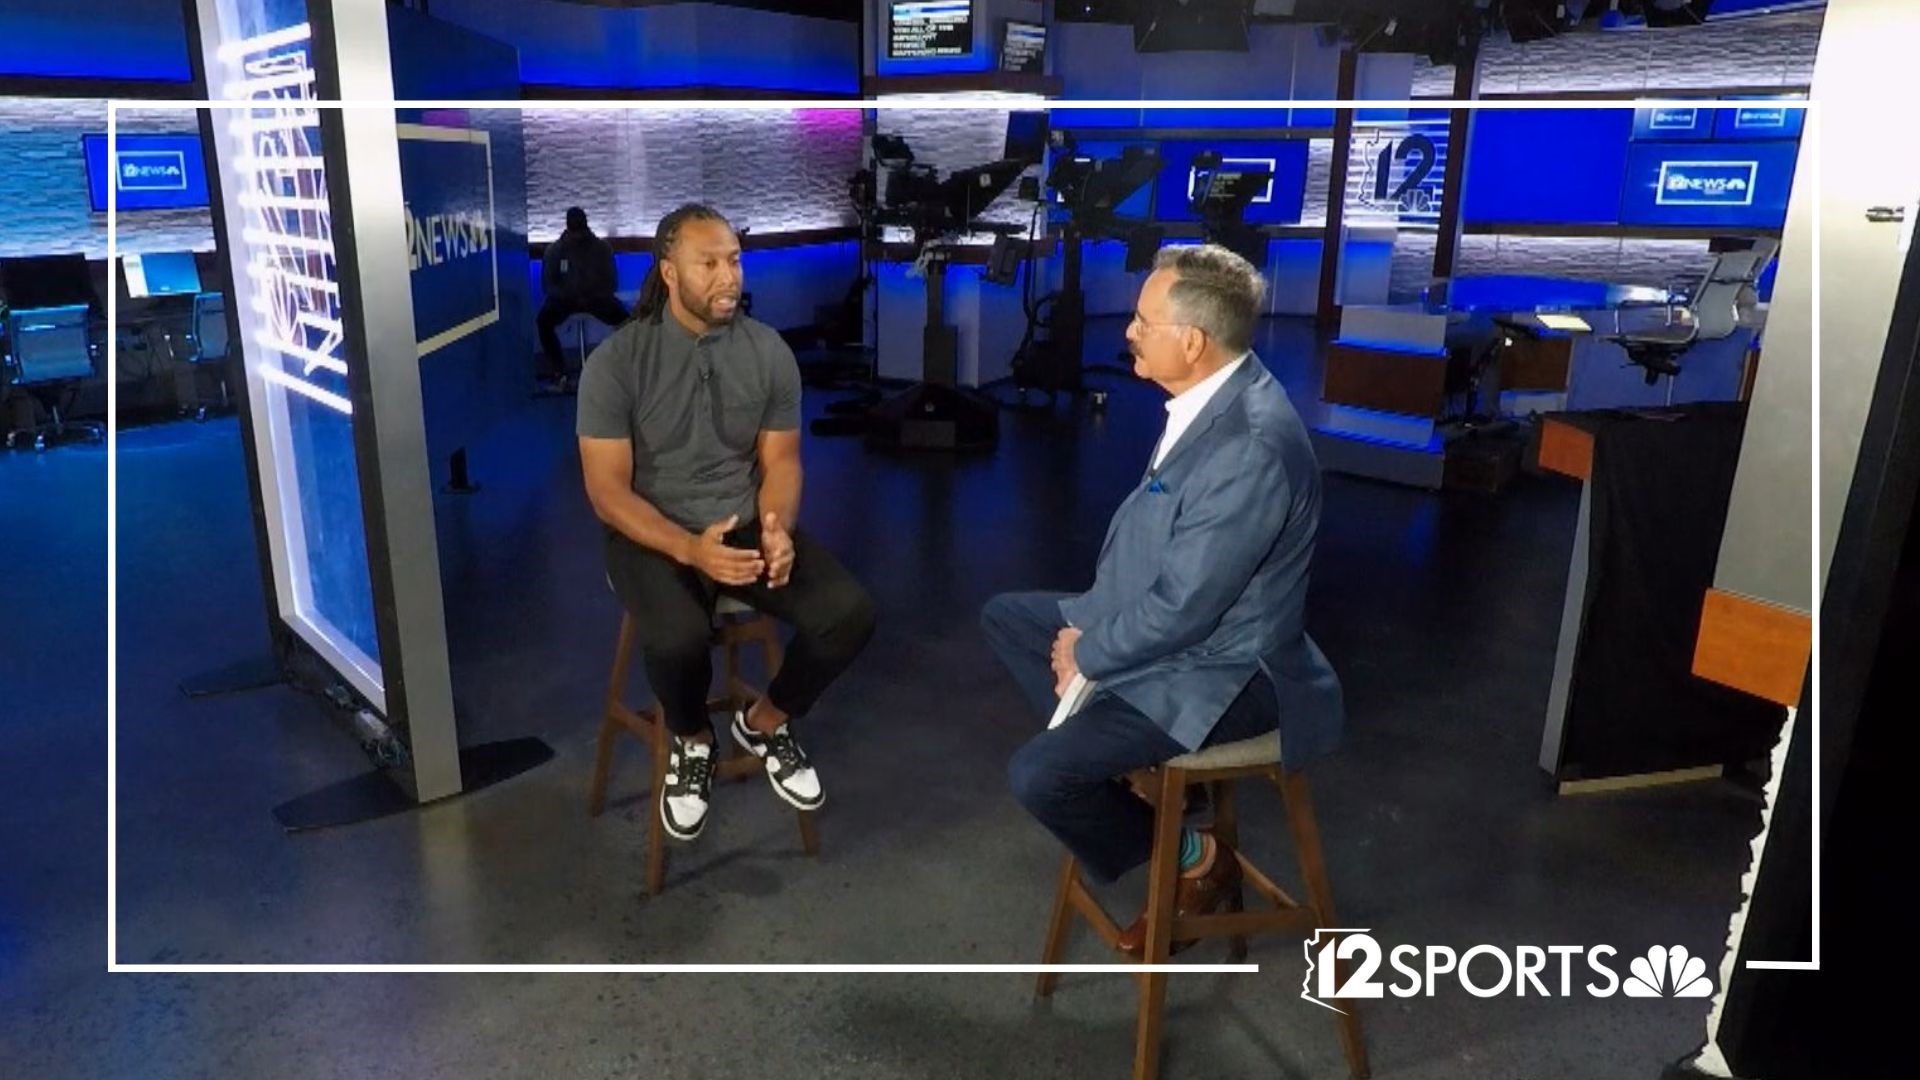 It's been a couple of years since Larry Fitzgerald played football. He recently sat down with Mark Curtis to talk about what he's been up to since his playing days.